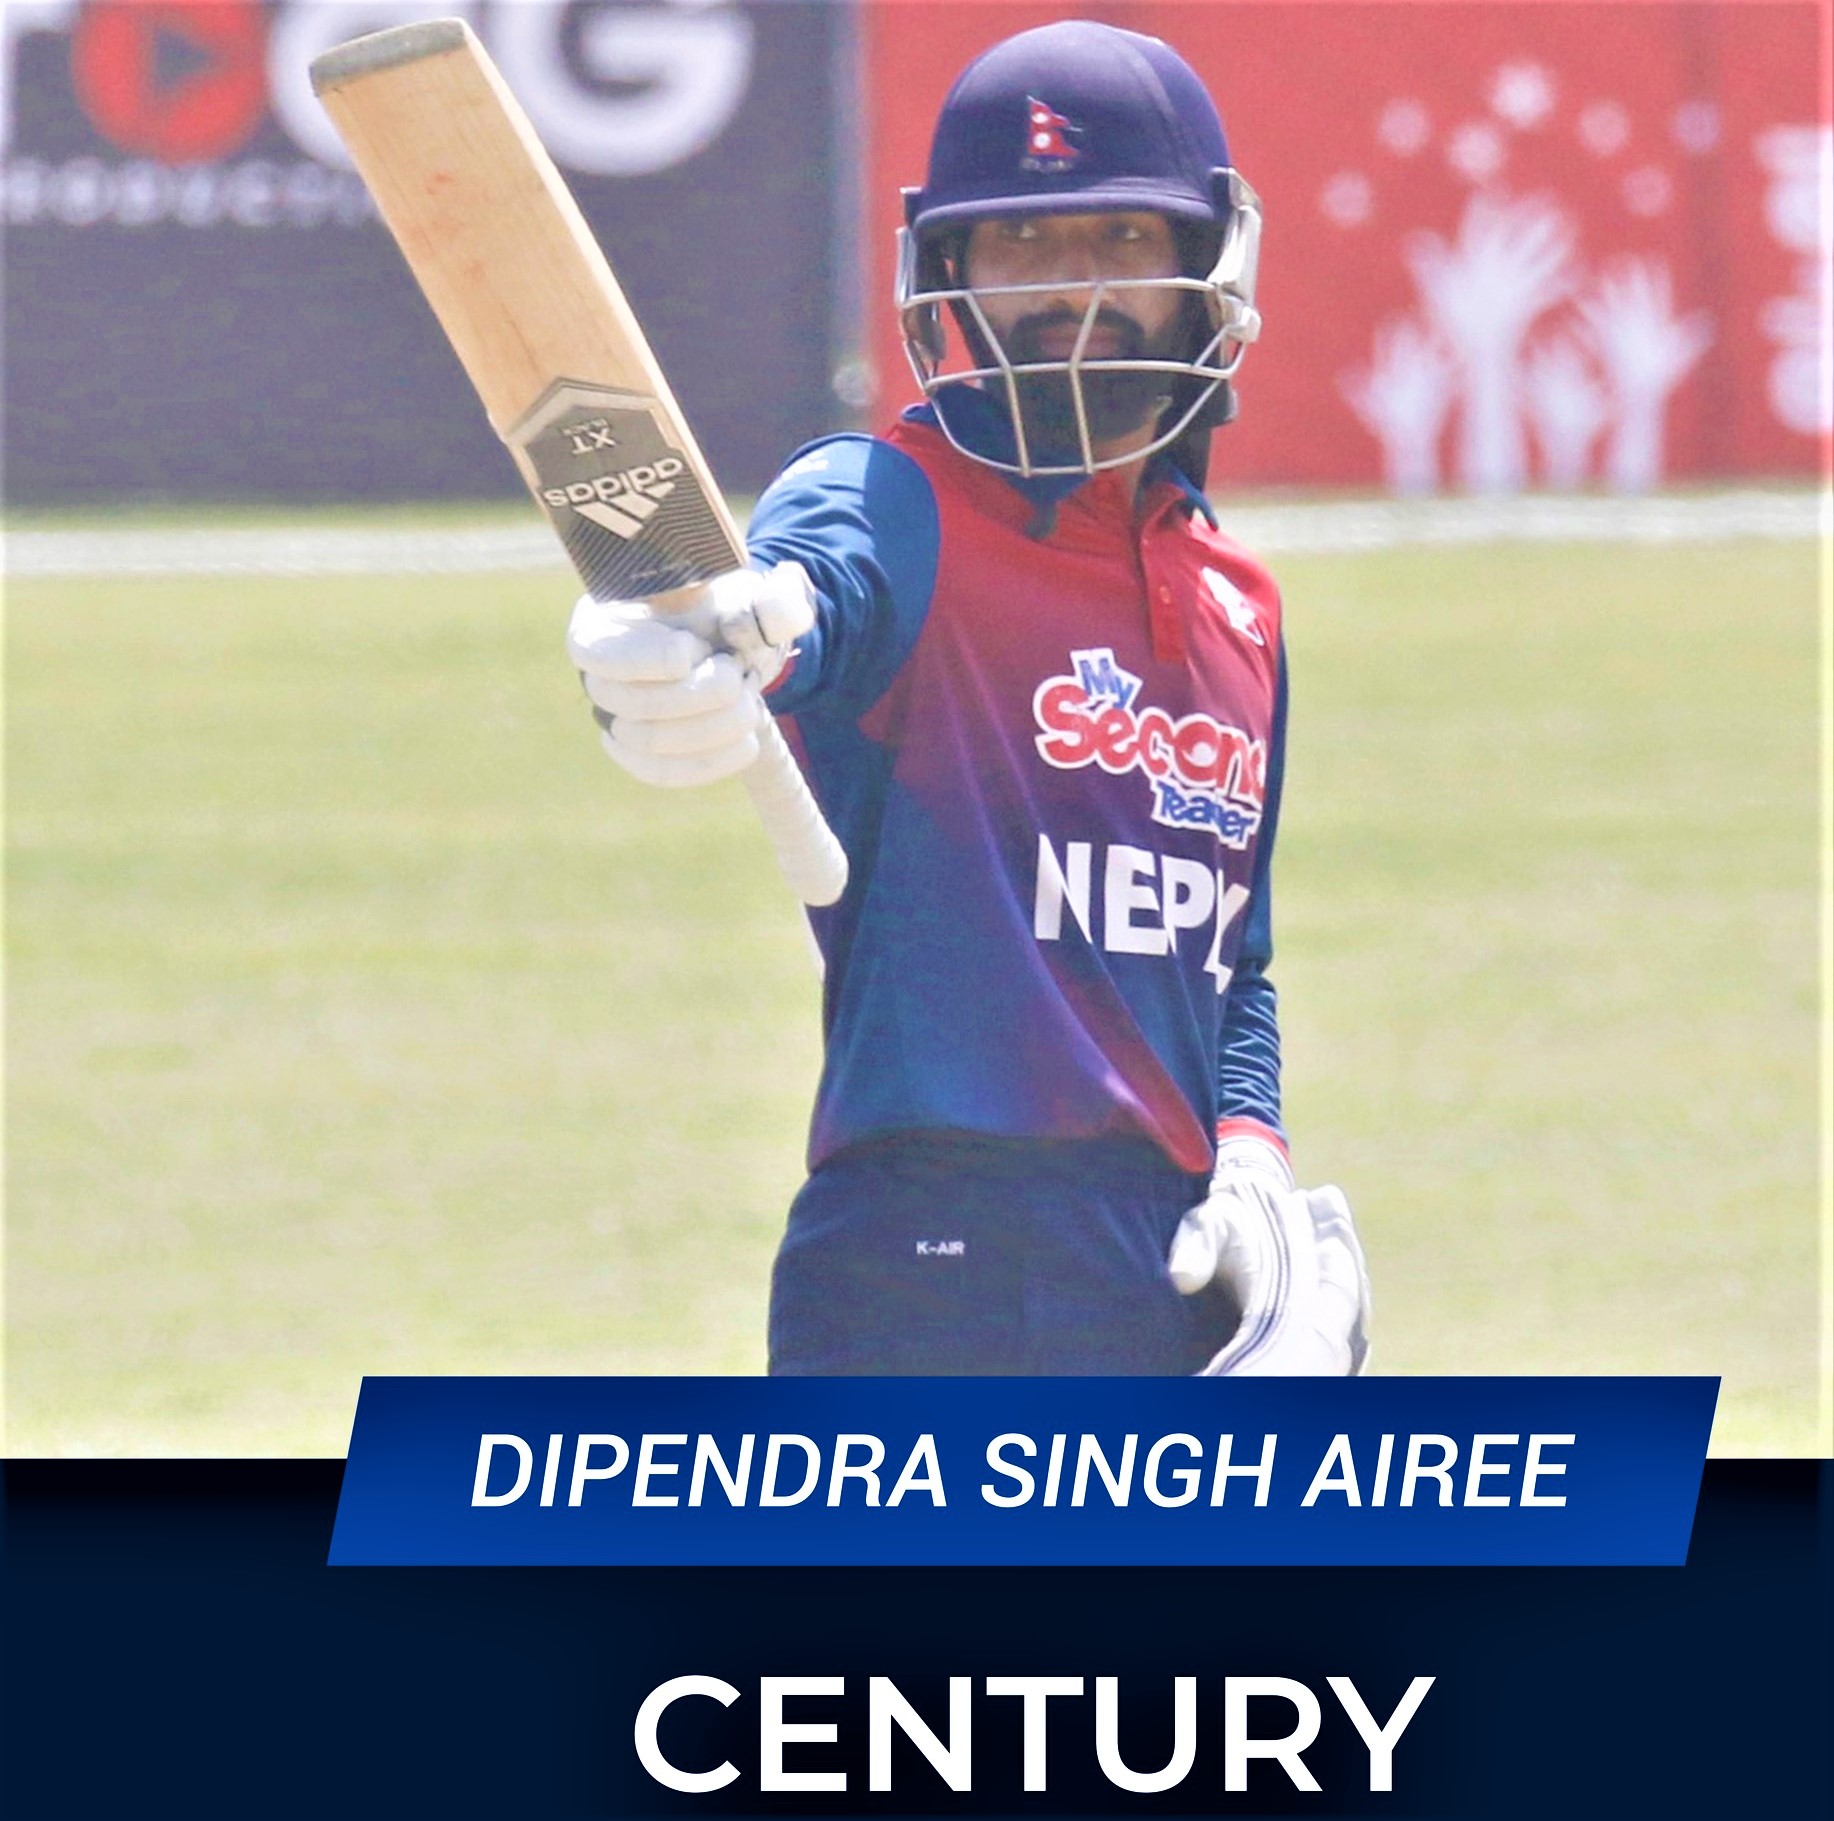 With Dipendra’s first century, Nepal sets a target of 279 runs against PNG